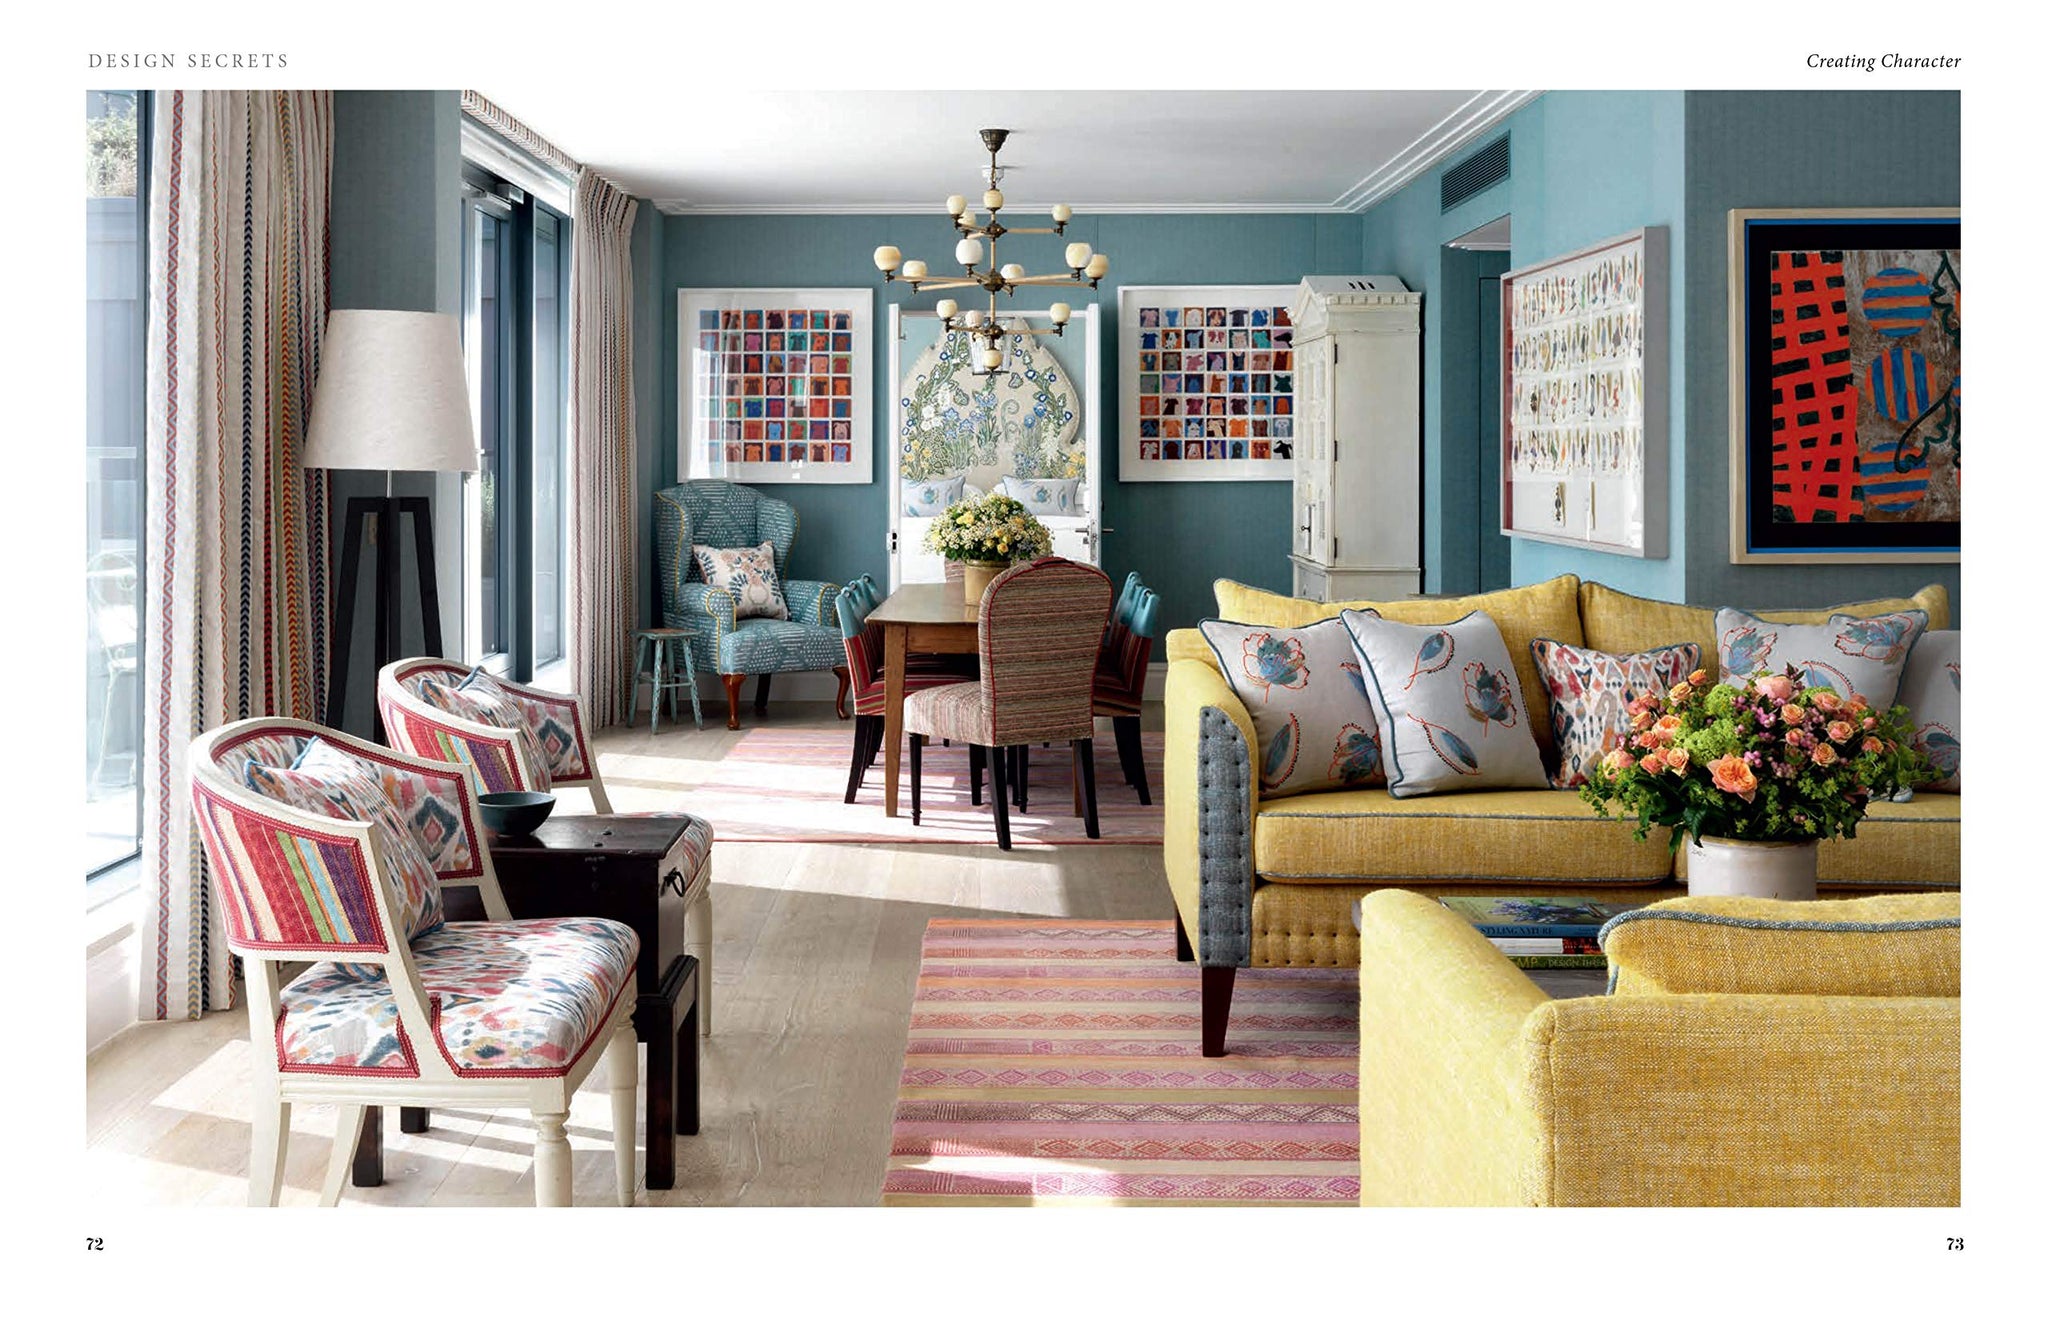 Design Secrets: Adding Character and Style to an Interior to Make it Your Own